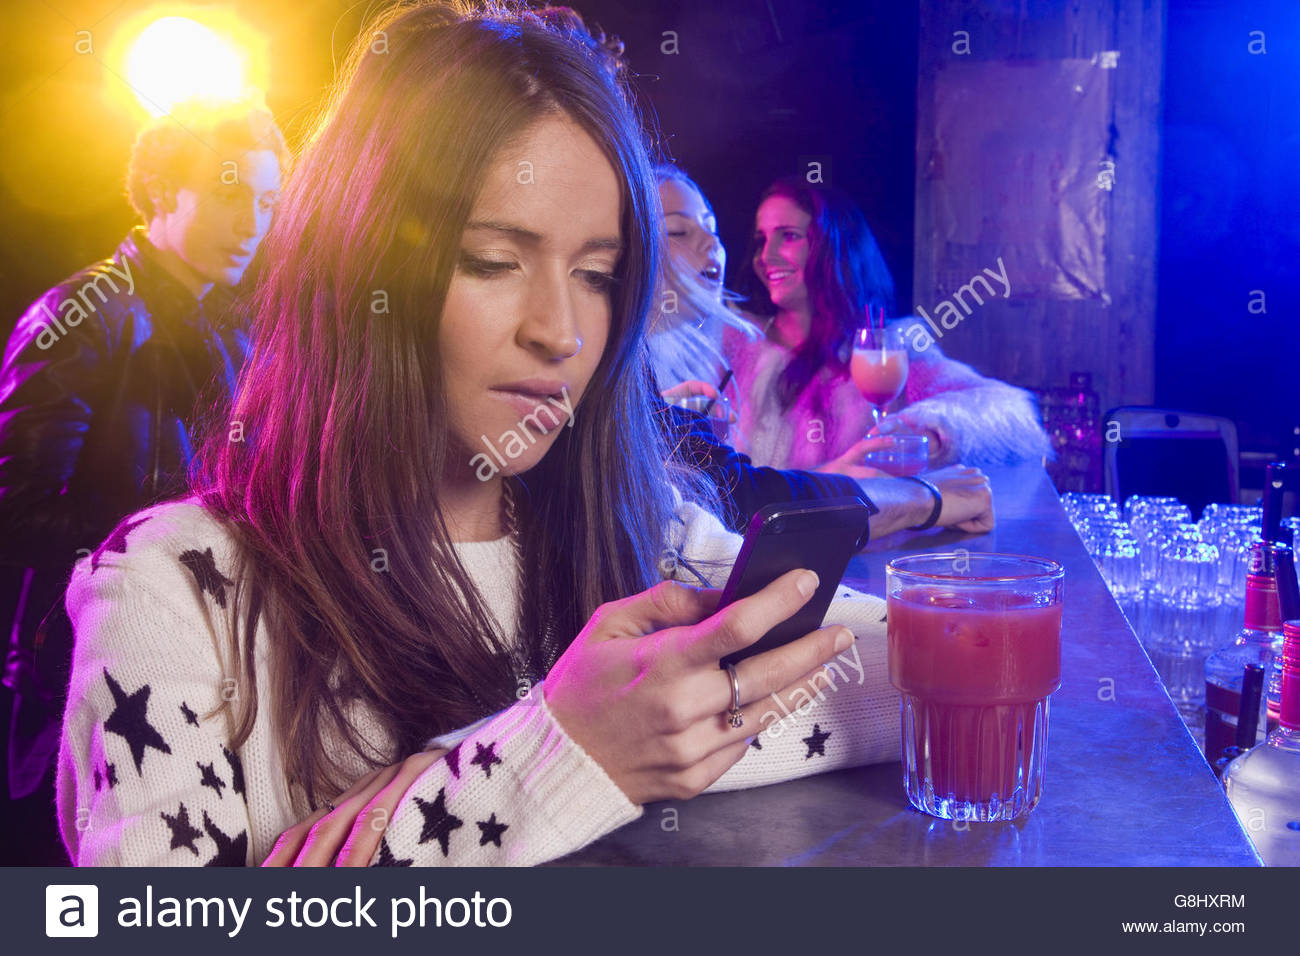 pensive-young-woman-texting-on-cell-phone-in-nightclub-G8HXRM.jpg